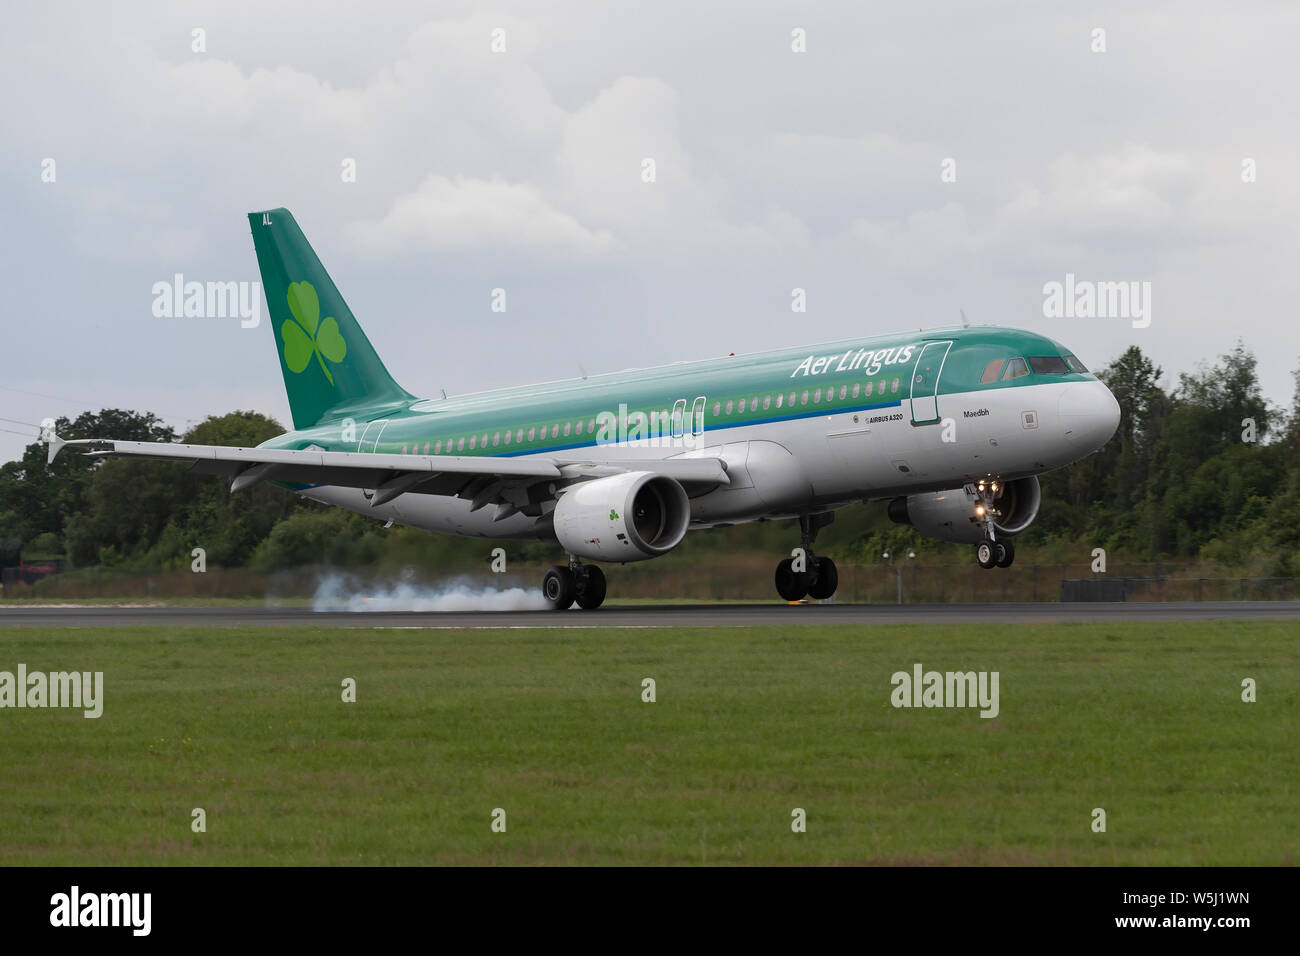 An Aer Lingus Airbus A320-200 lands at Manchester International Airport (Editorial use only) Stock Photo